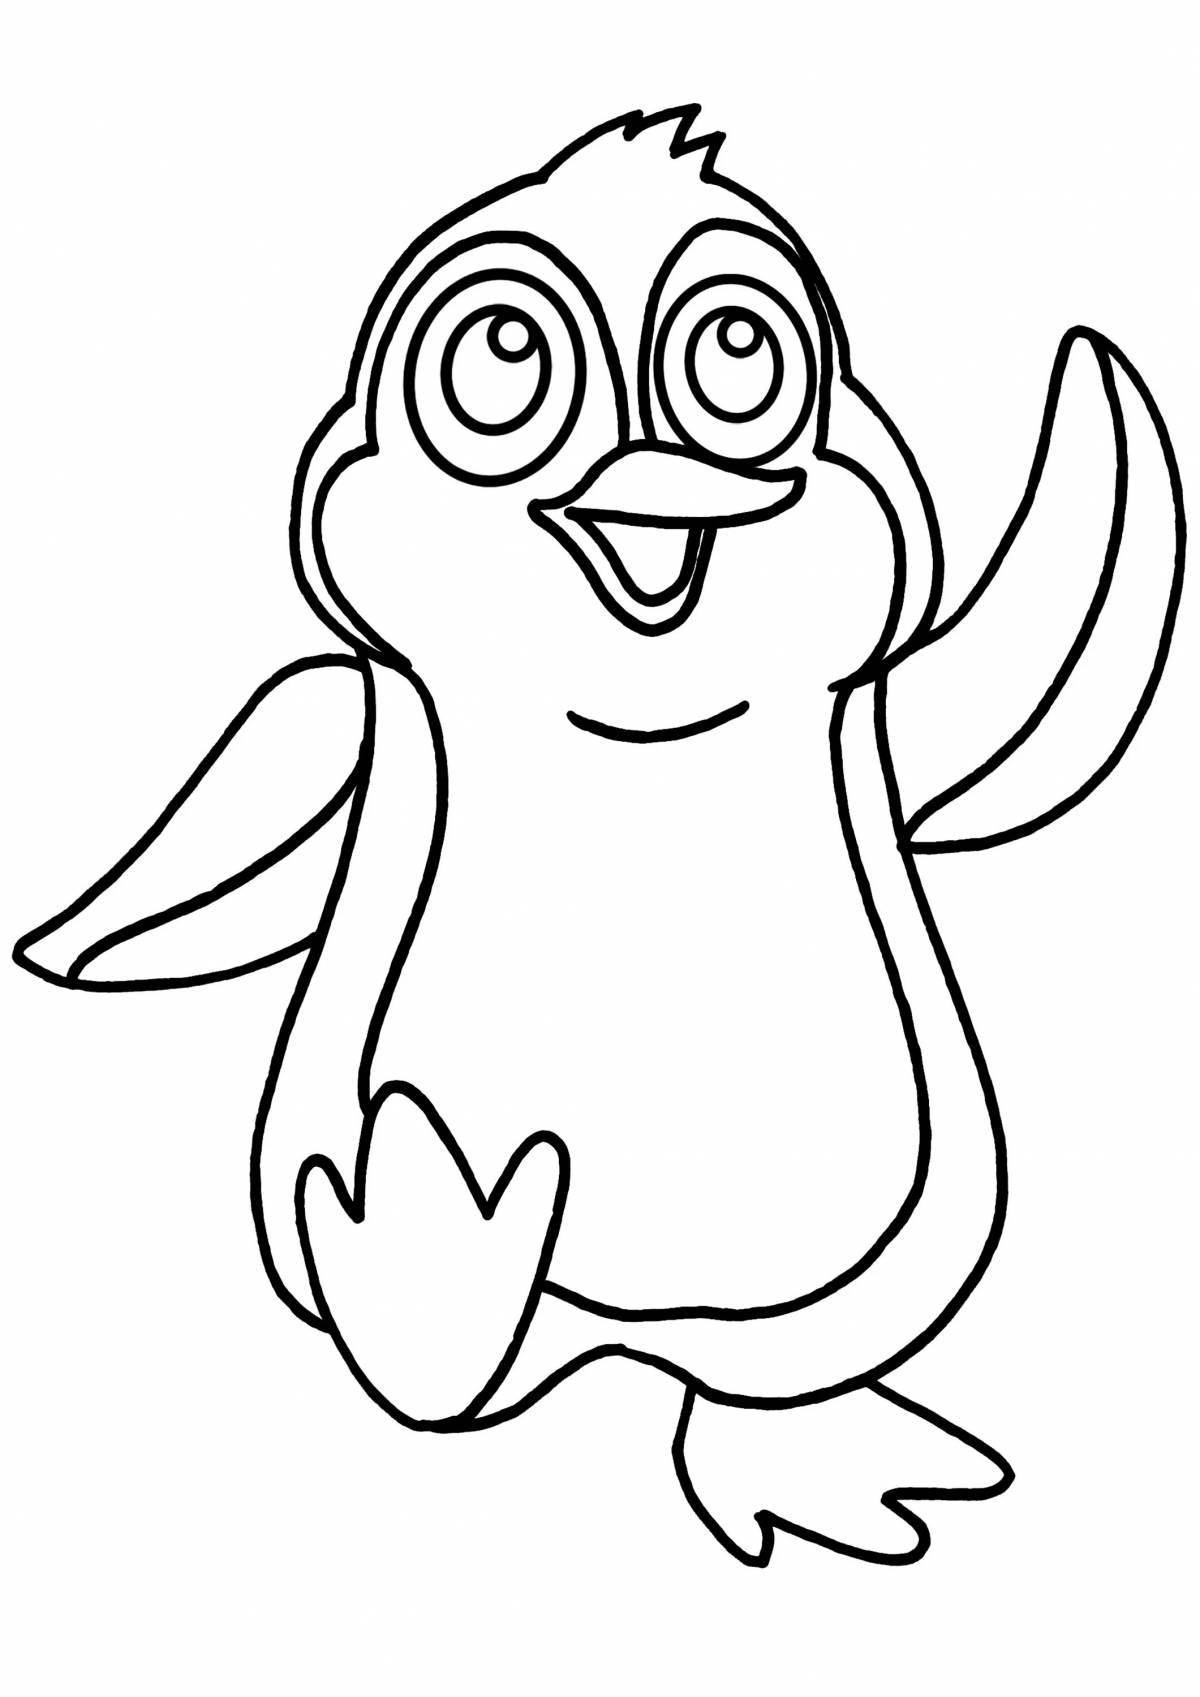 Adorable penguin coloring book for kids